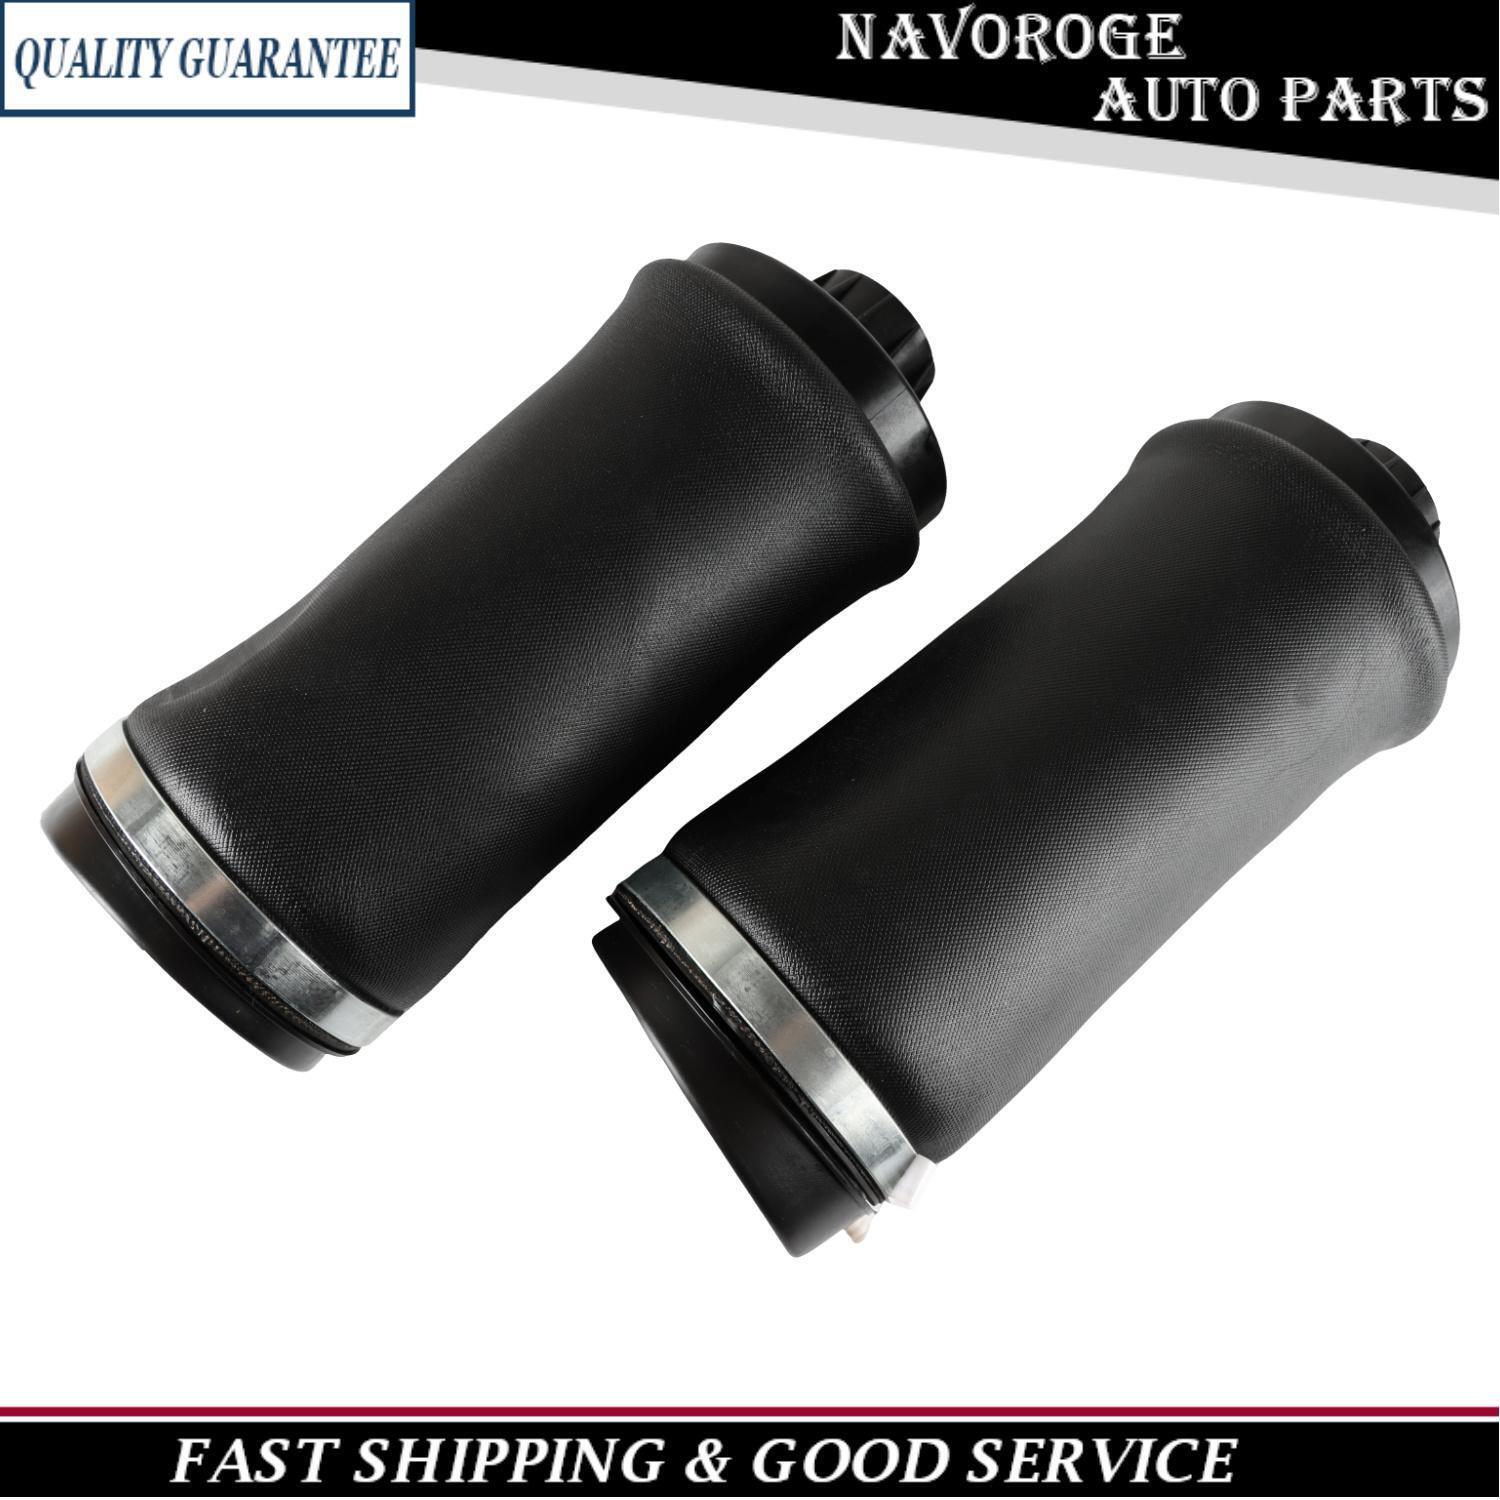 2x Rear Air Suspension Spring Bags For 2011-2015 Jeep Grand Cherokee 68029912AE